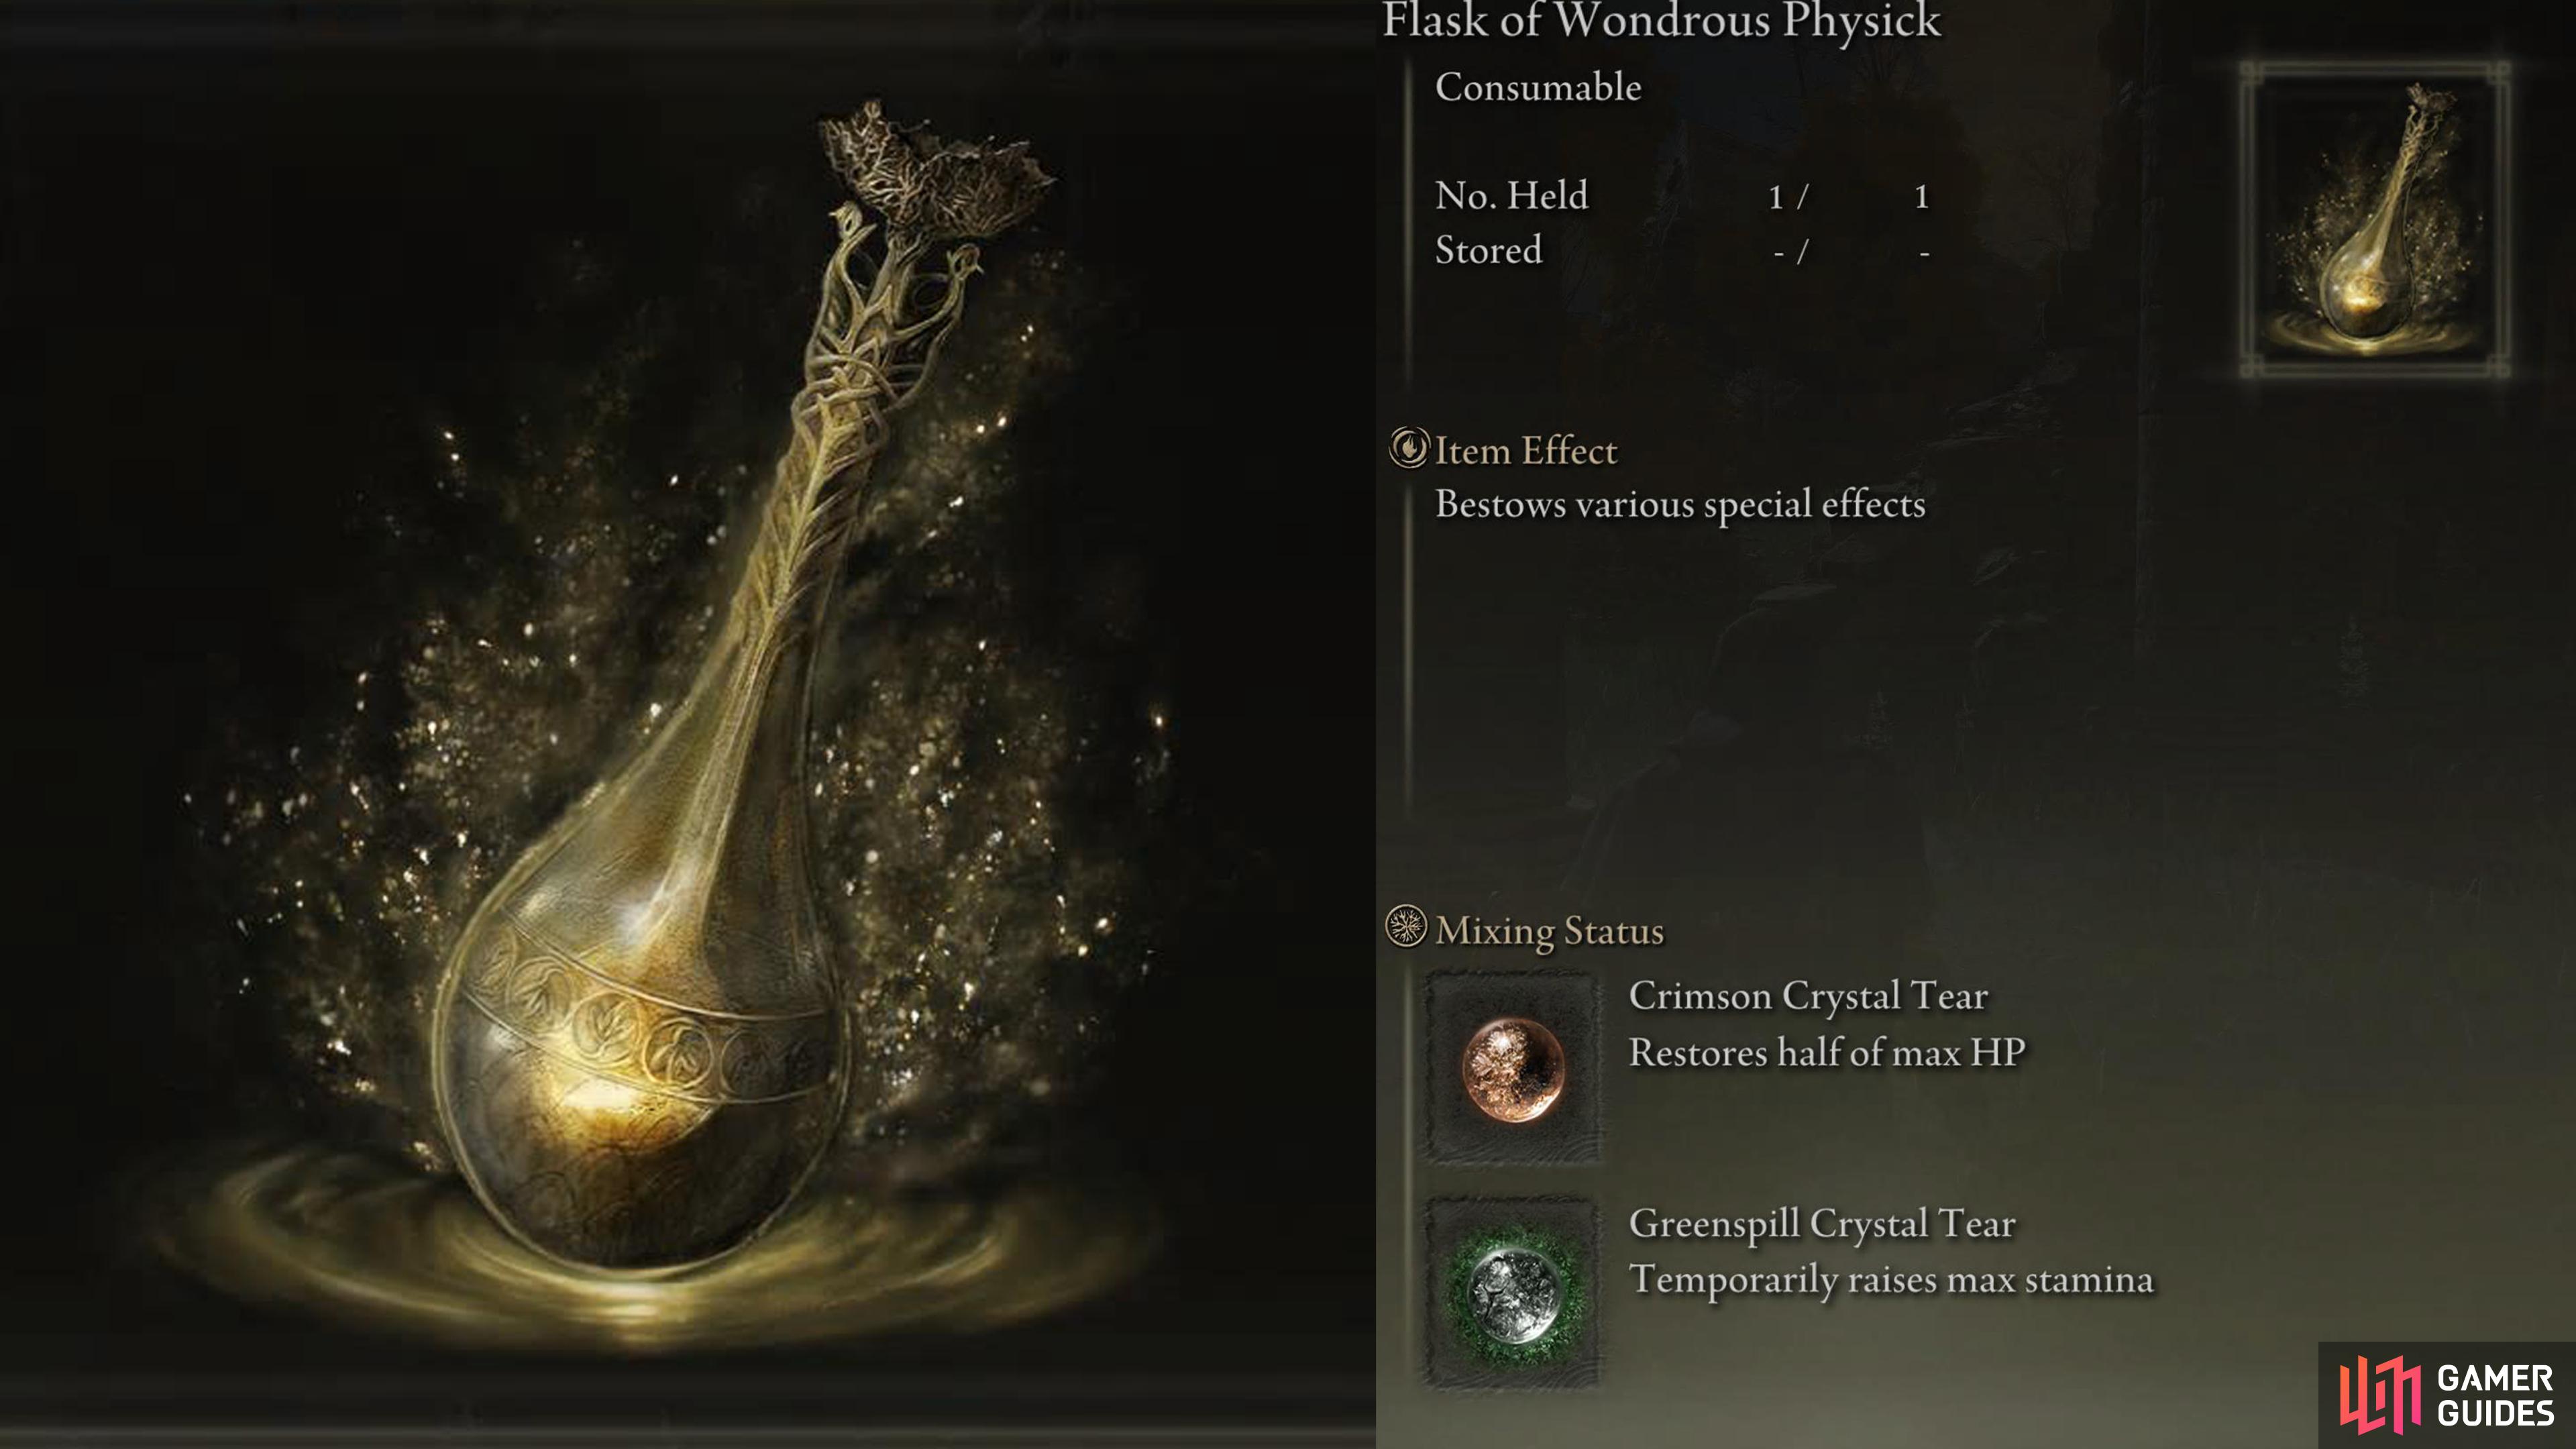 You can add to Tears to the Flask of Wondrous Physick. This'll give you all kinds of various effects.